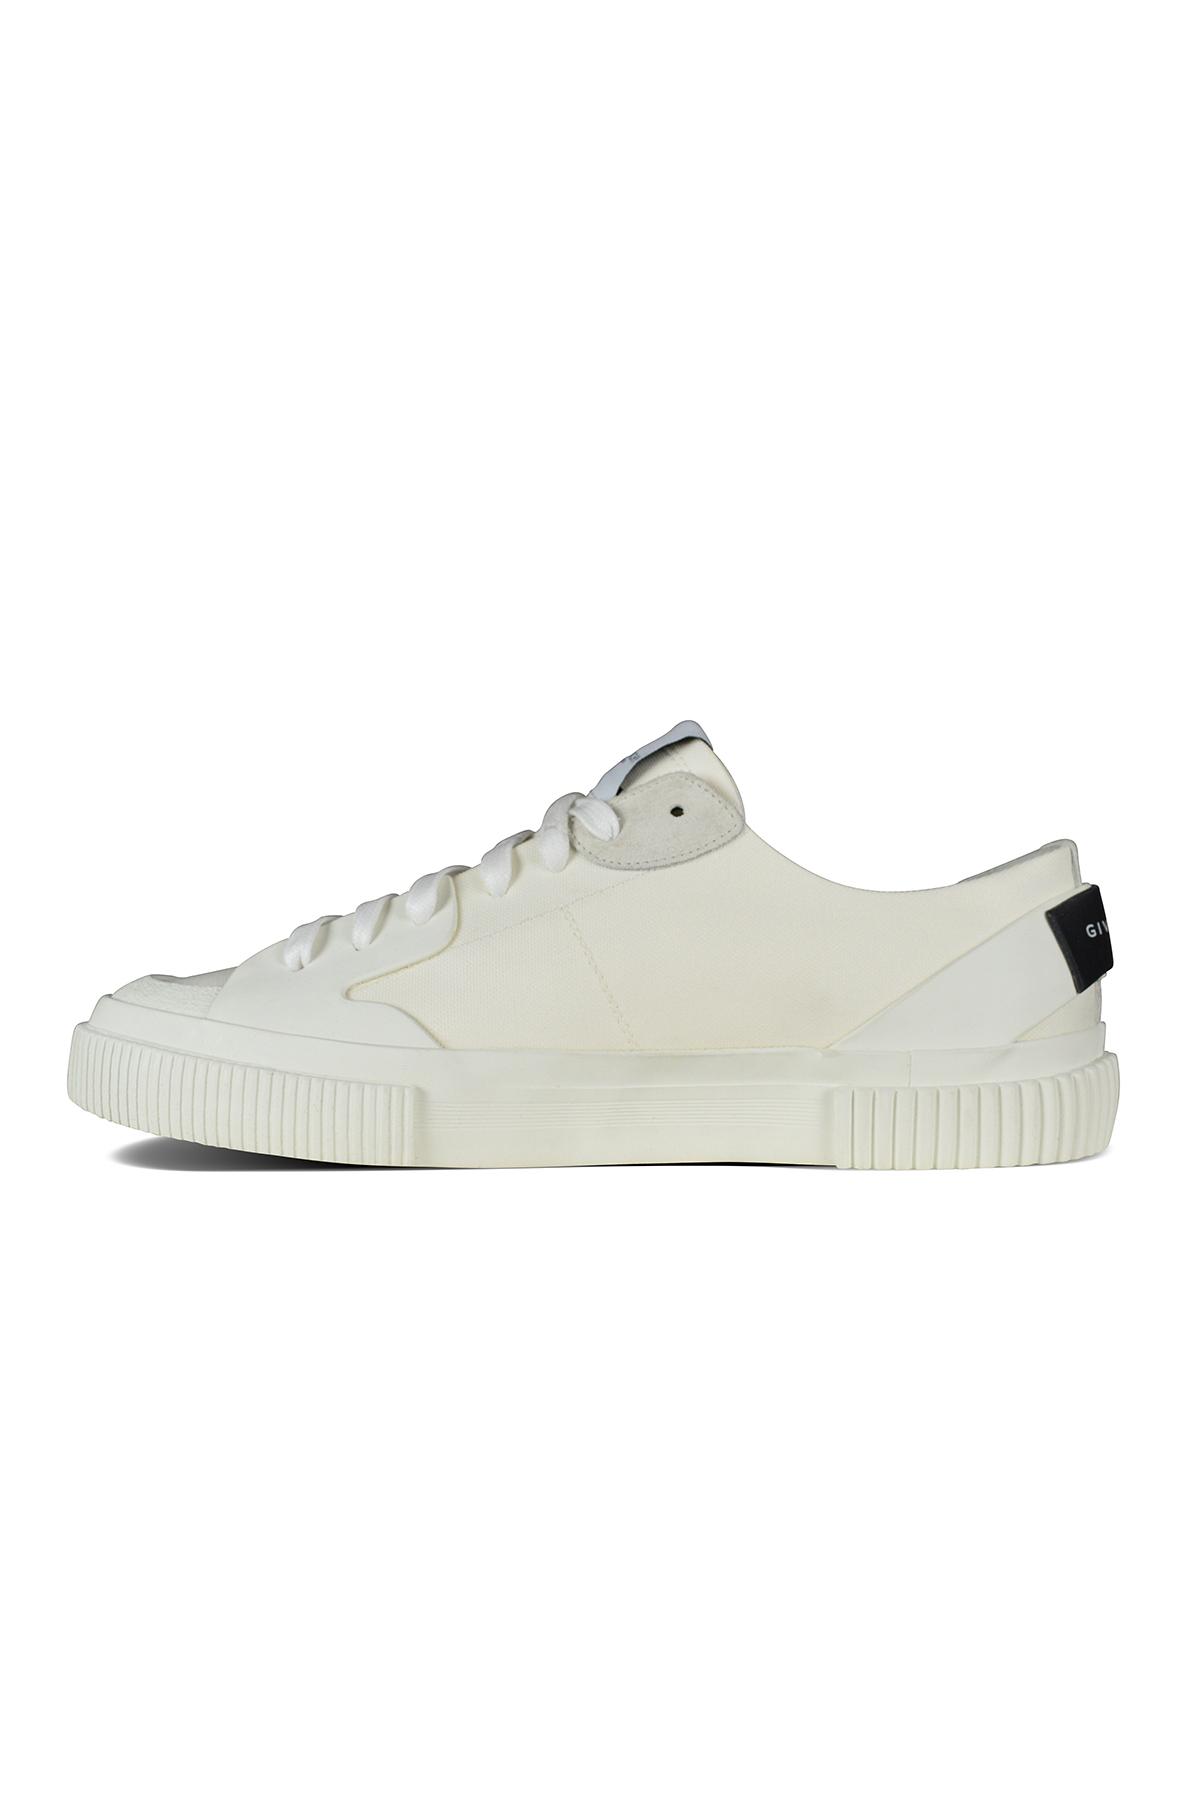 Givenchy Sneakers Tennis Light in White for Men | Lyst